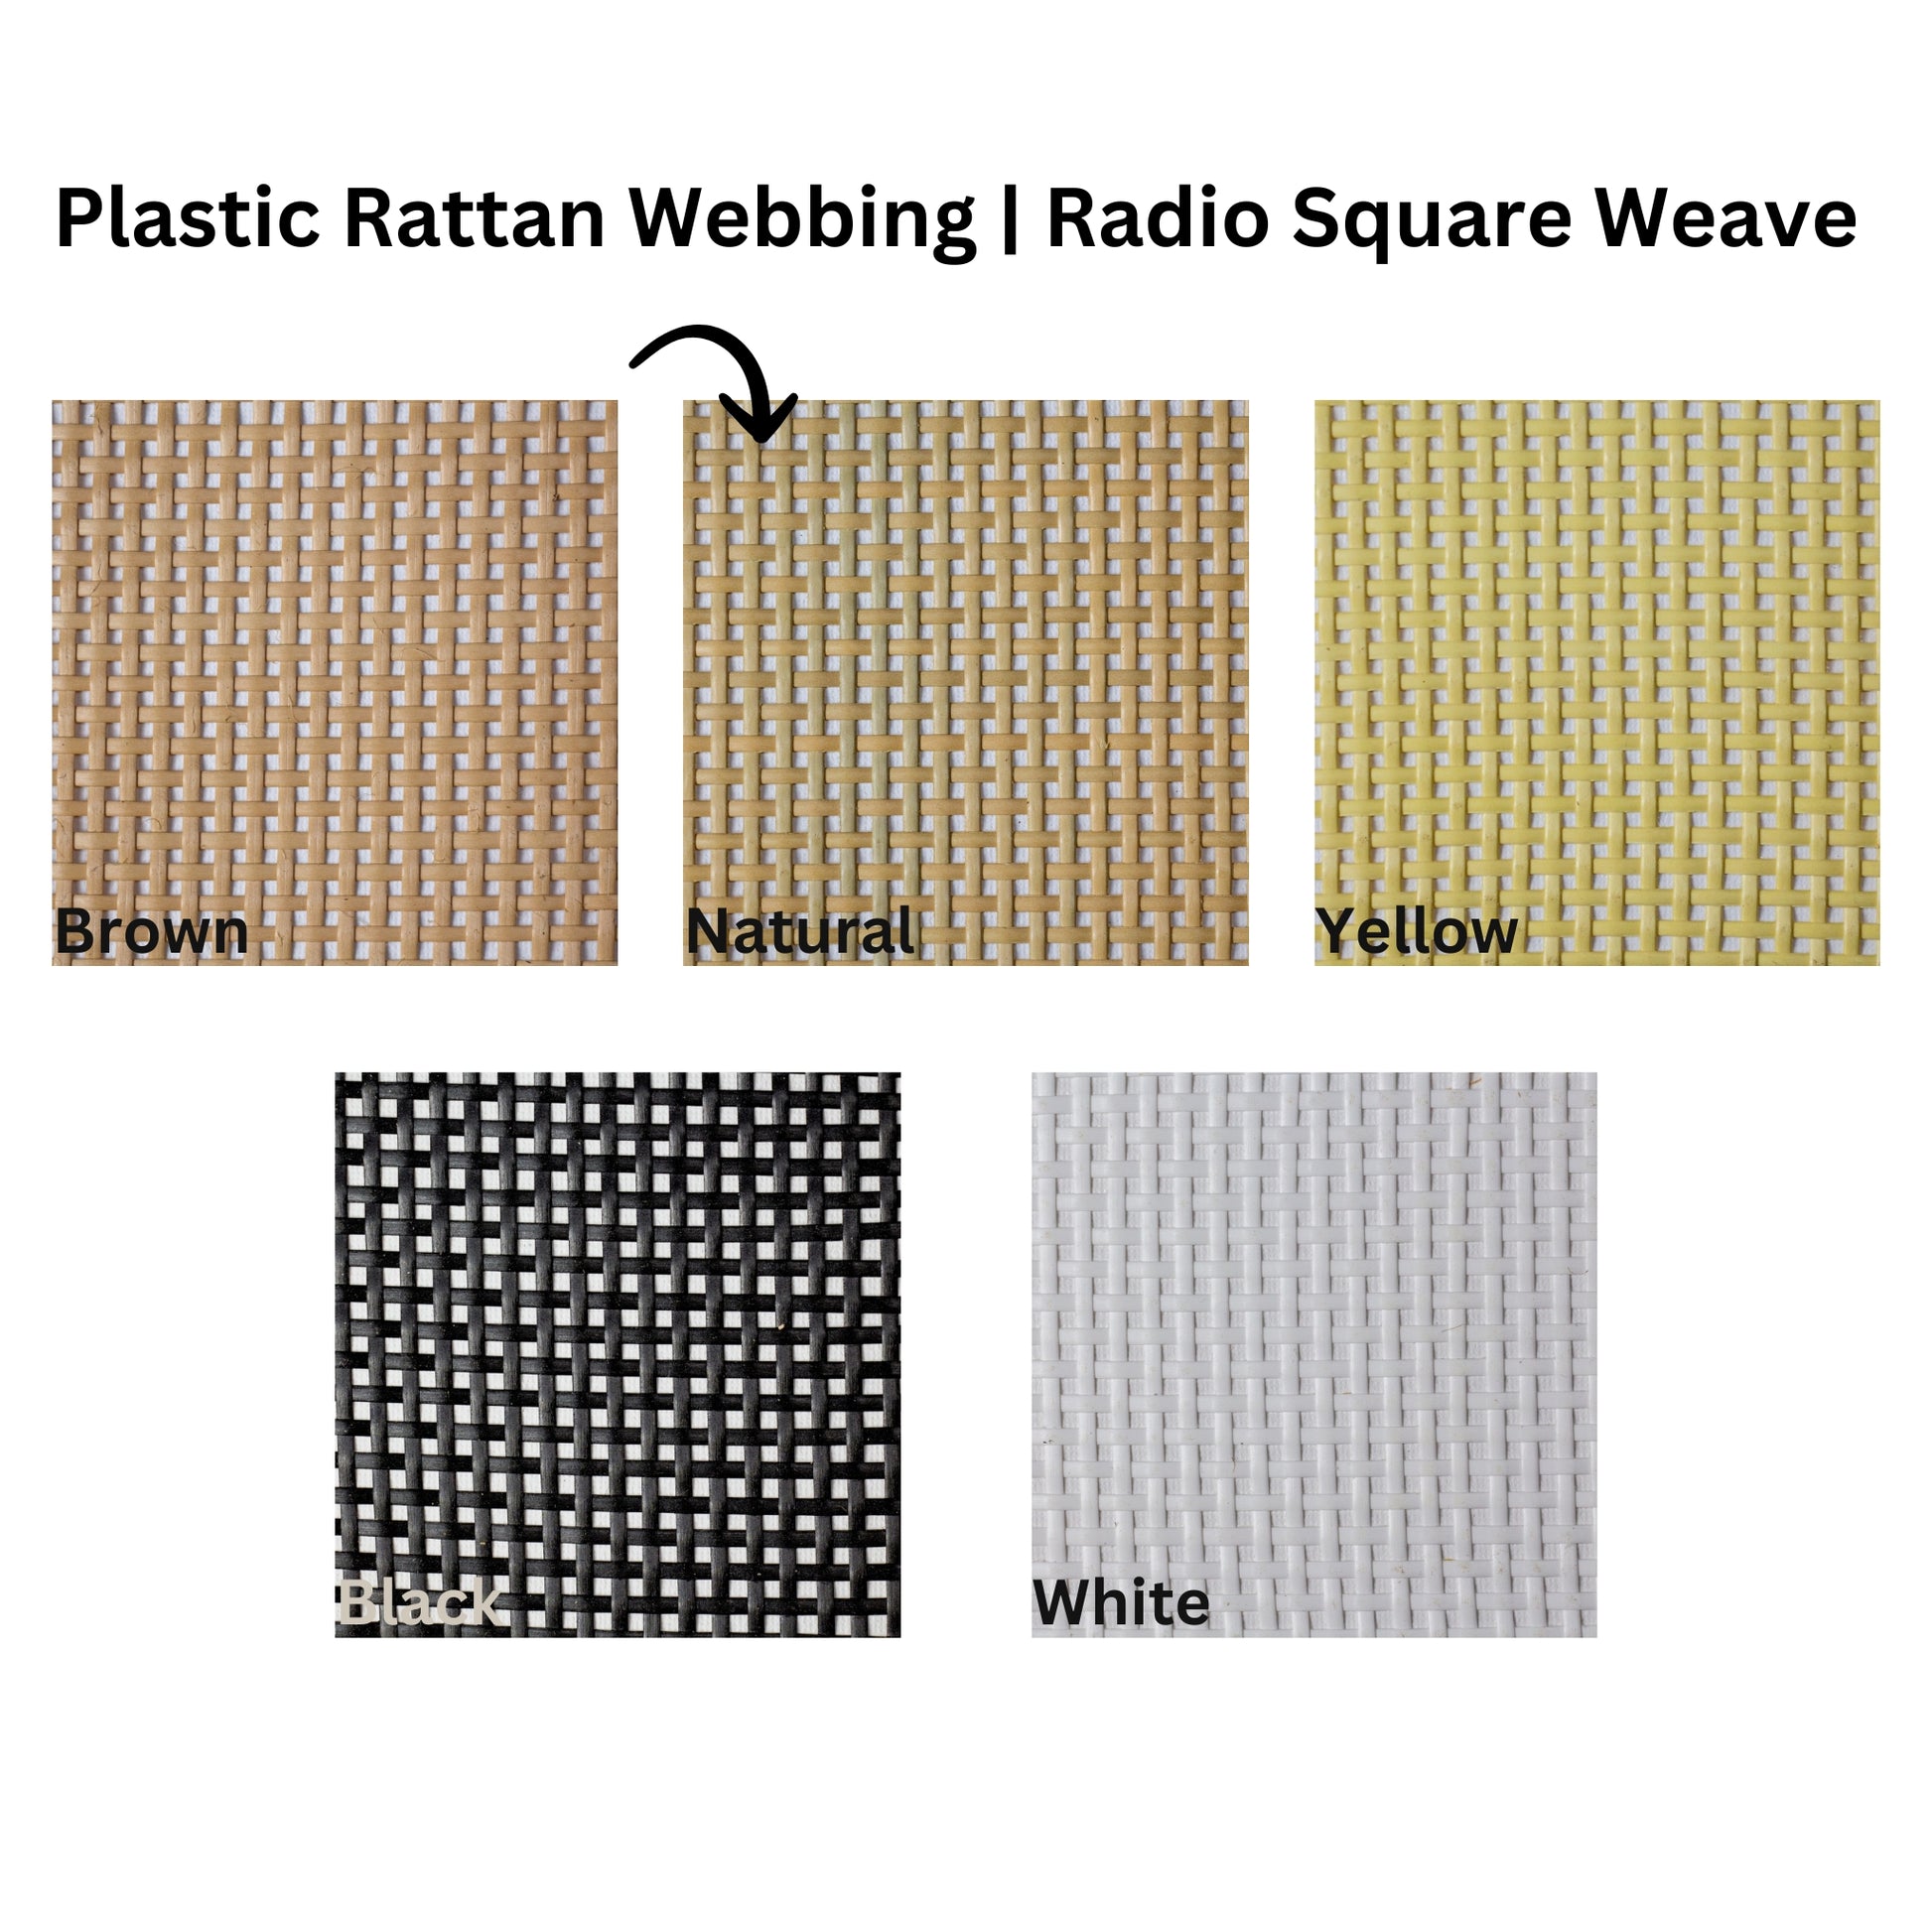 Plastic-Synthetic-Faux-PE-Rattan-Cane-Webbing-Mesh-Roll-Panel-Furniture-Chair-Repair-Open-Weave-Square-Radio-Melbourne-Australia-Natural-Brown-3